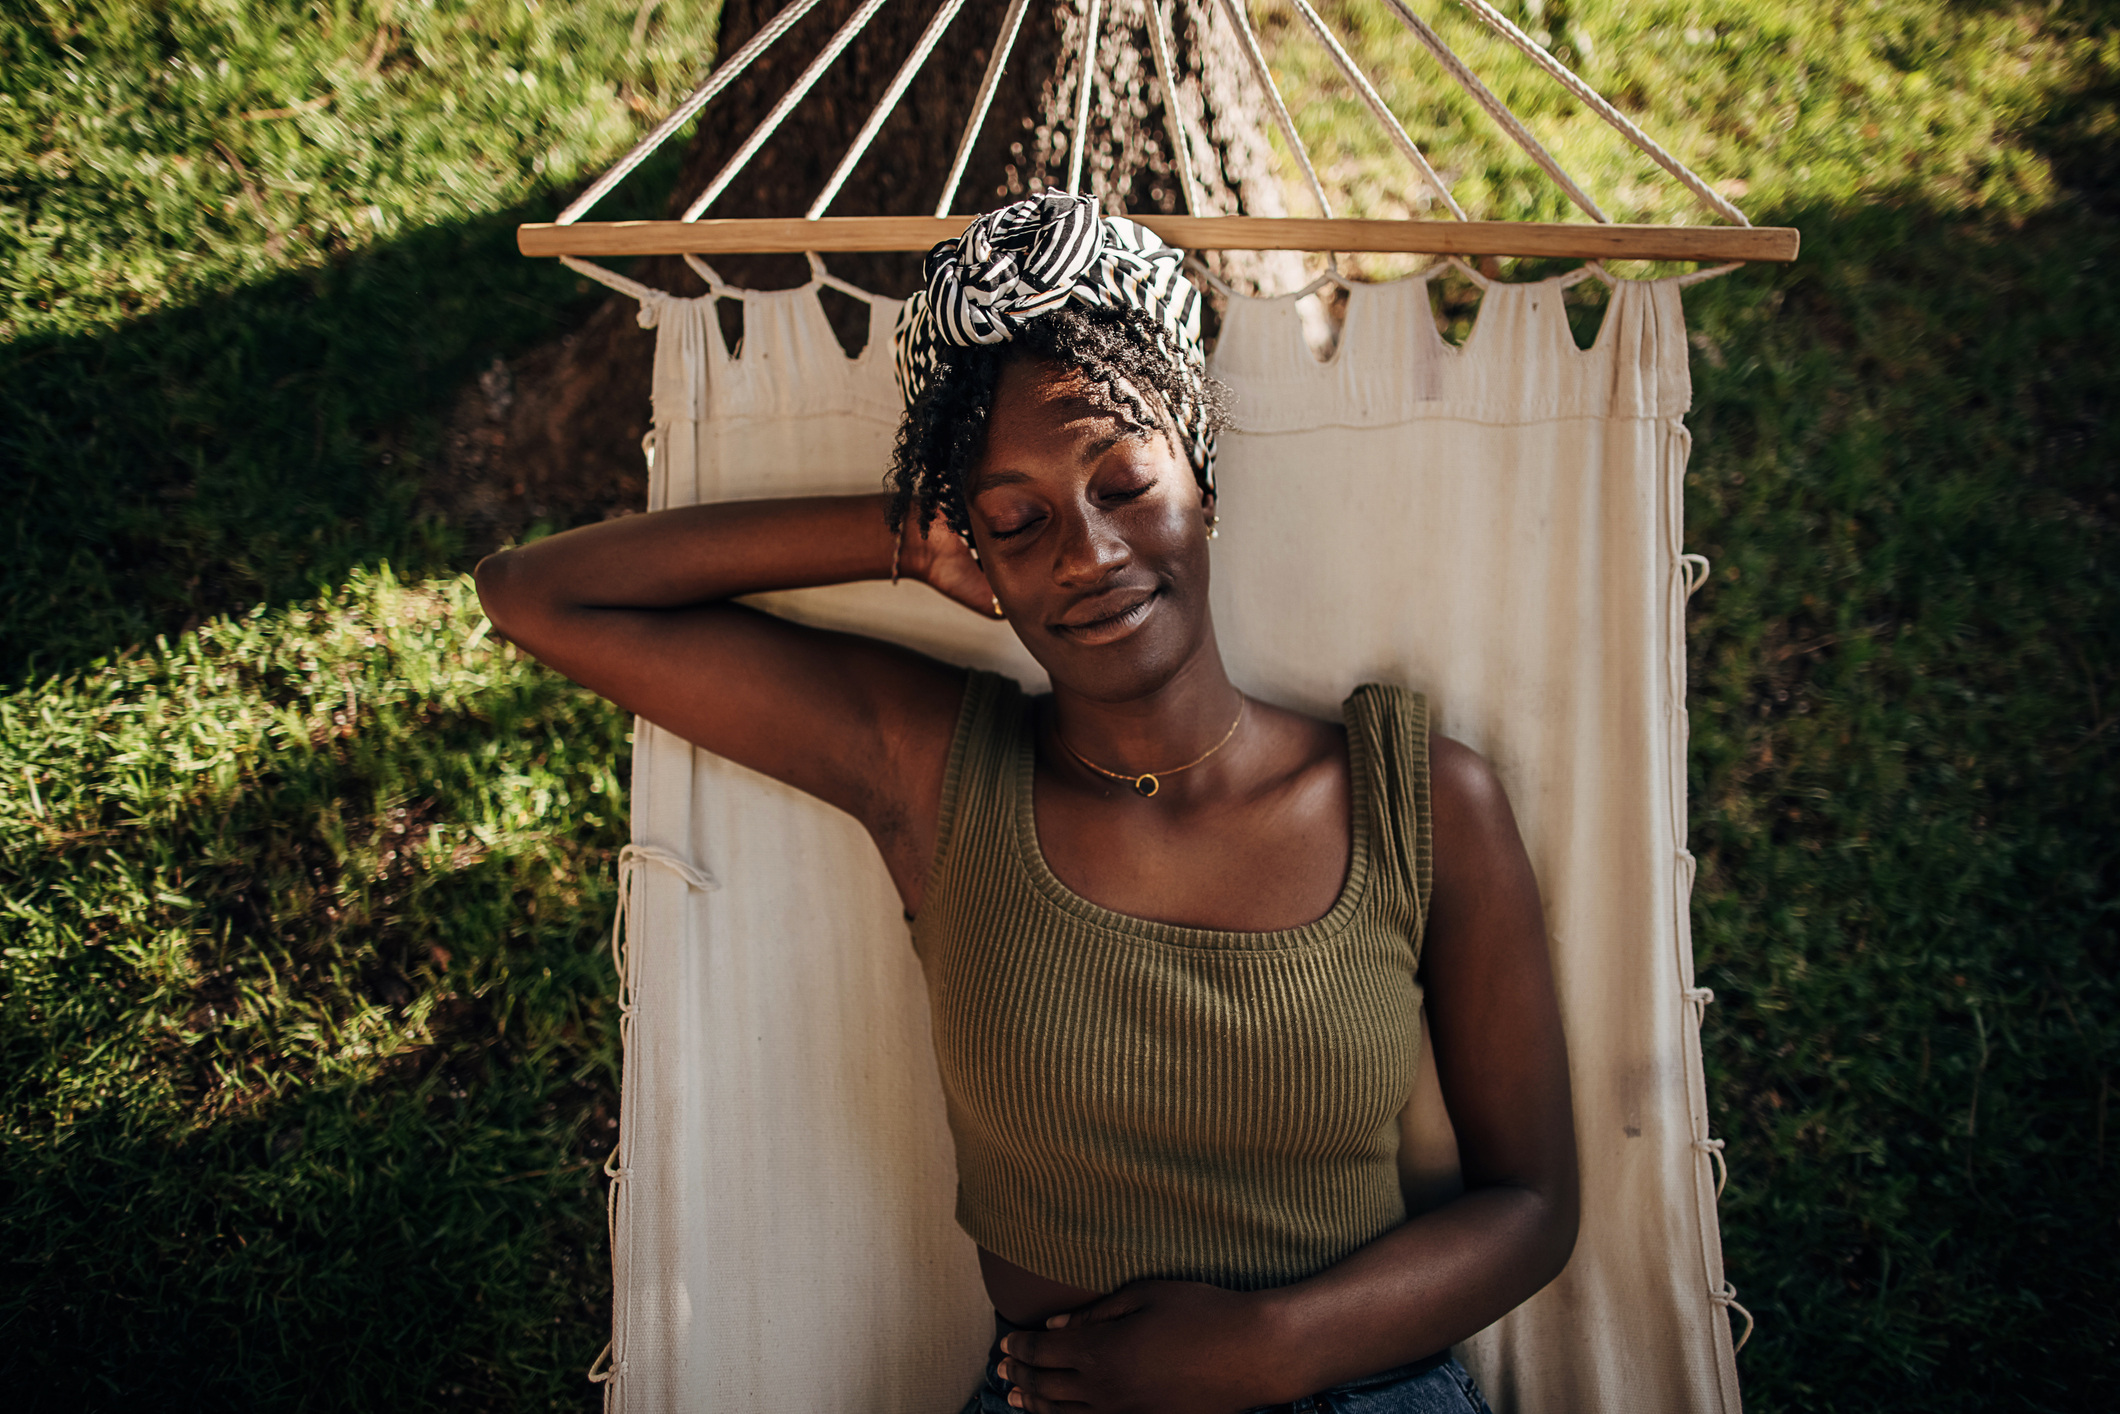 A person relaxes with eyes closed in a hammock under a tree, enjoying a peaceful moment outdoors. They wear a sleeveless top and a head wrap